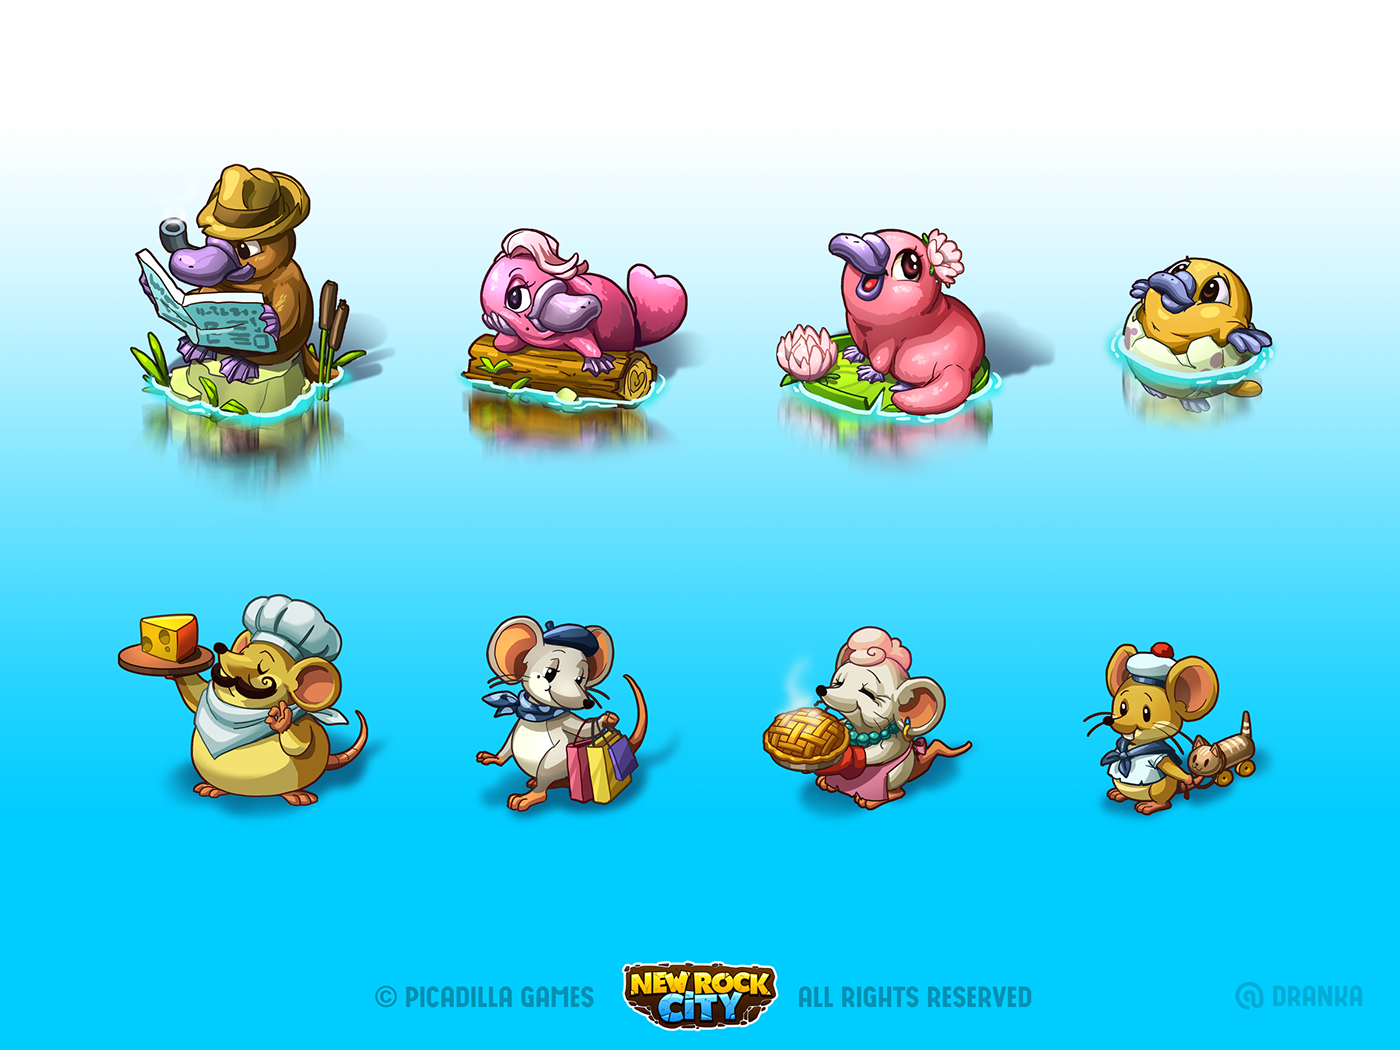 Isometric Game Art cartoon cell-shaded cute animals